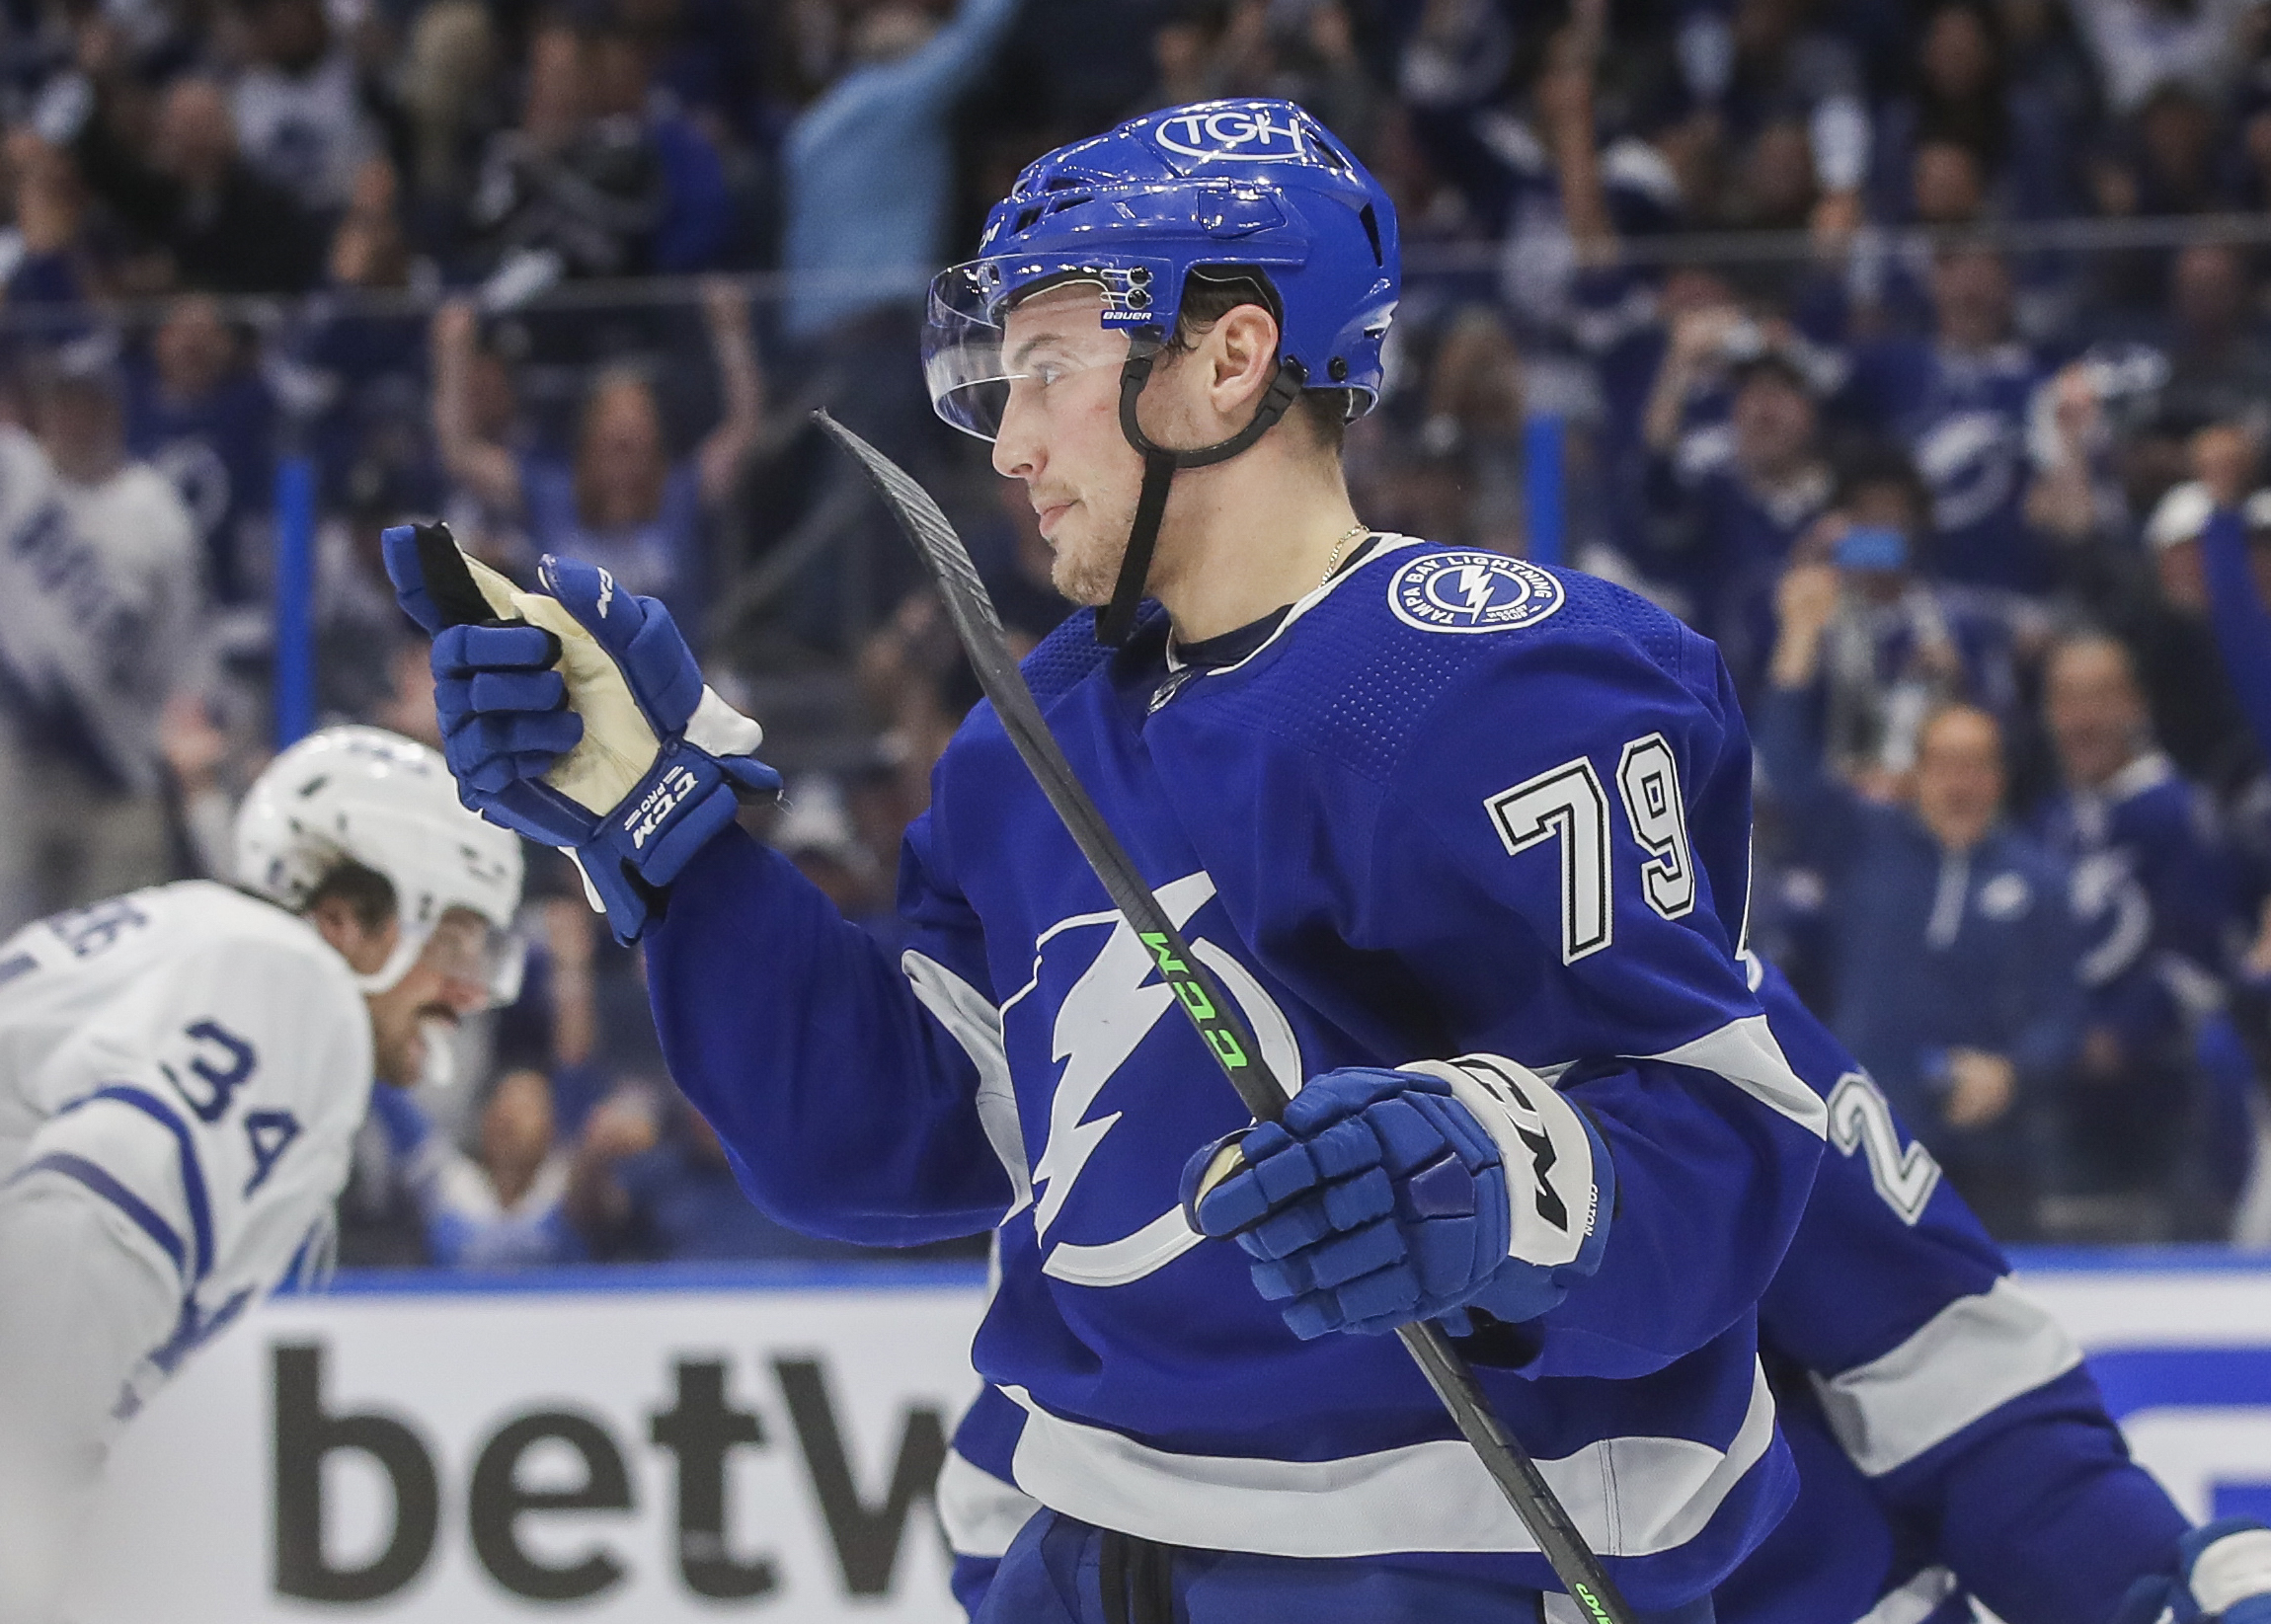 Lightning rookie Ross Colton capitalizes on playing opportunities